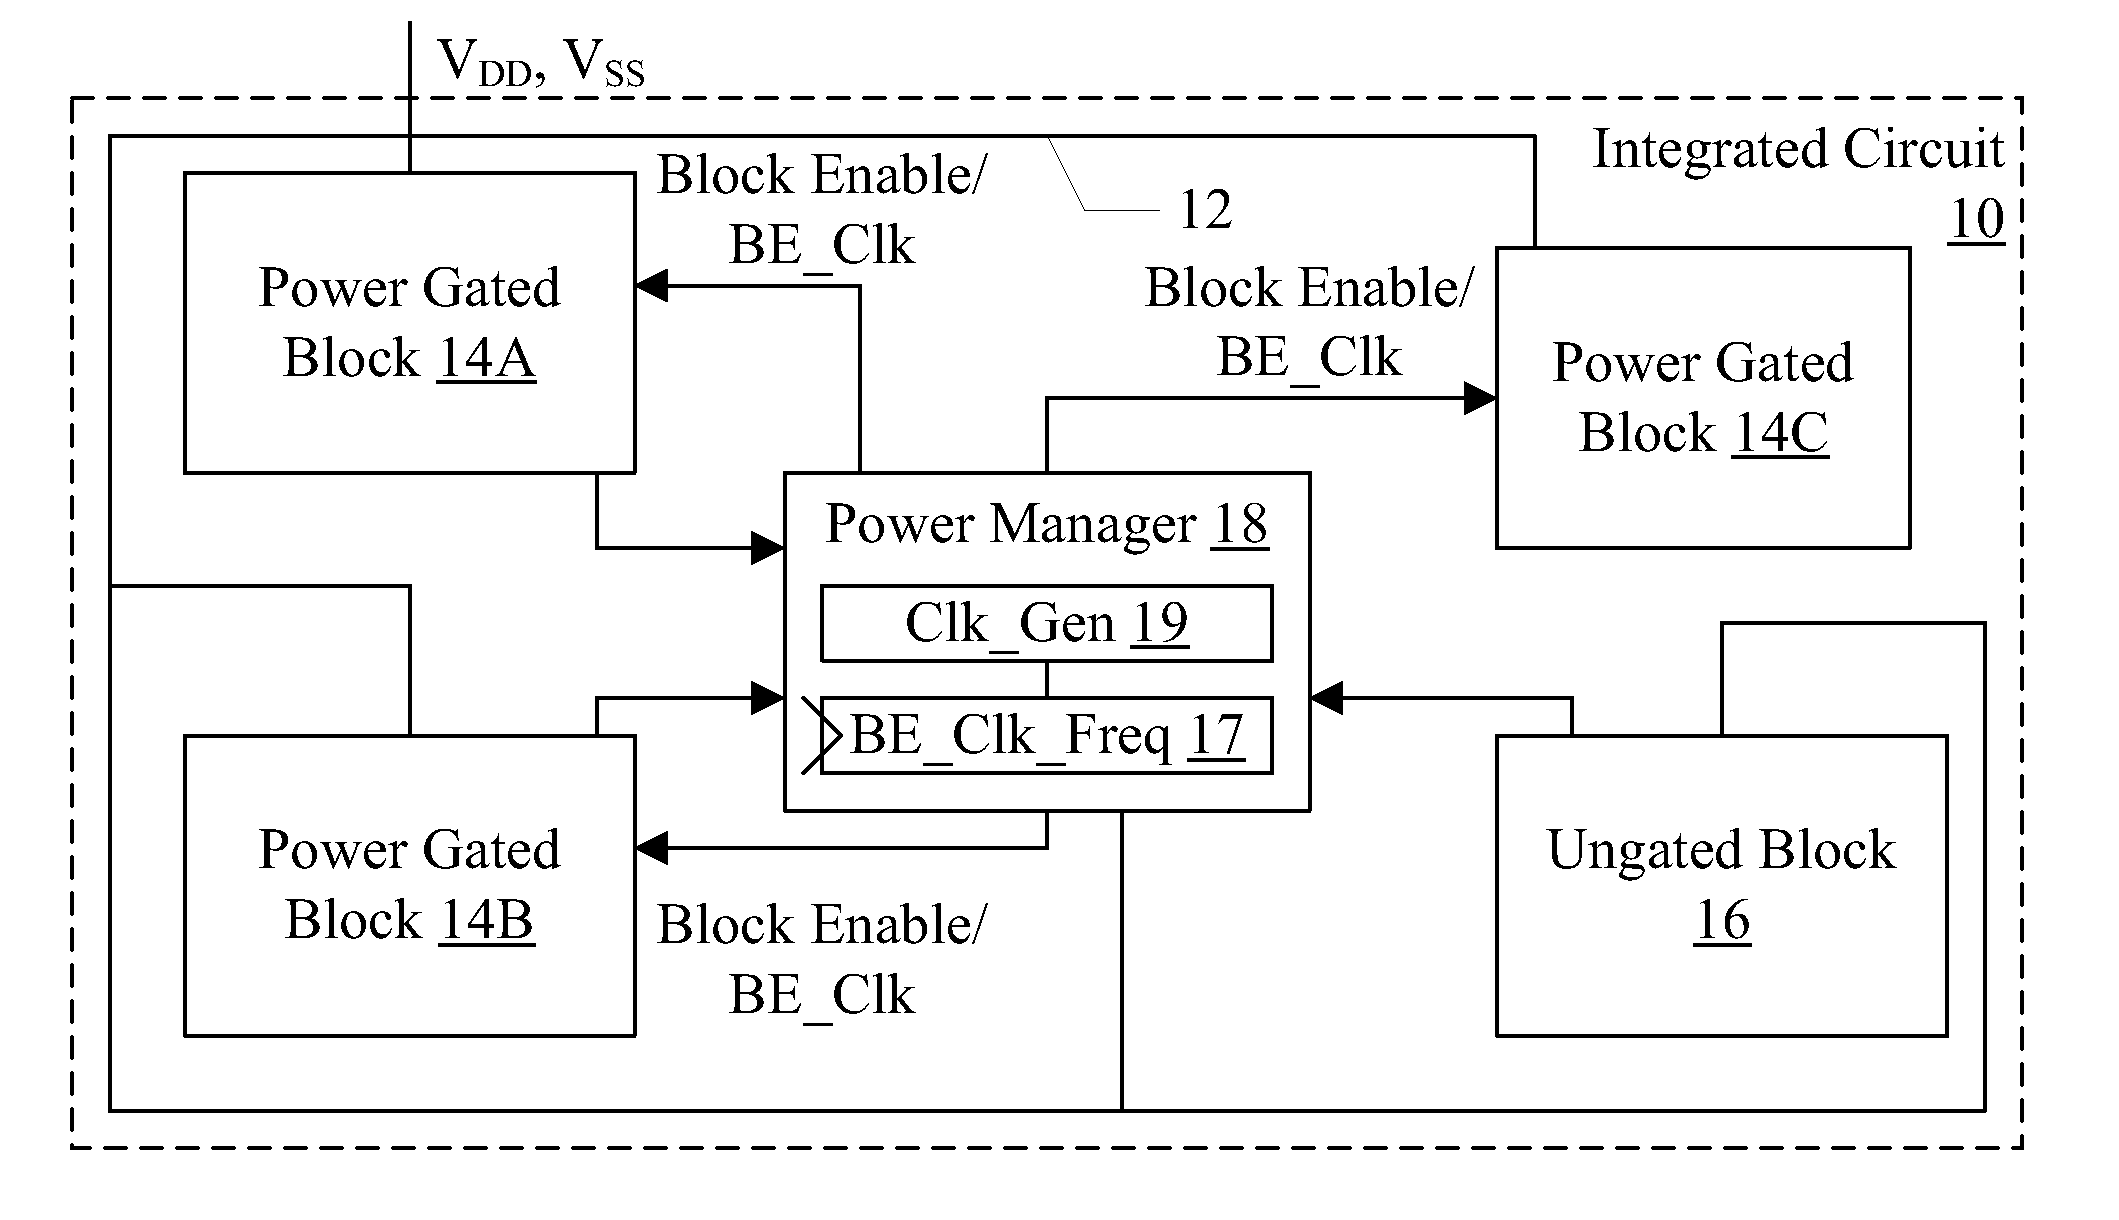 Power Switch Ramp Rate Control Using Daisy-Chained Flops